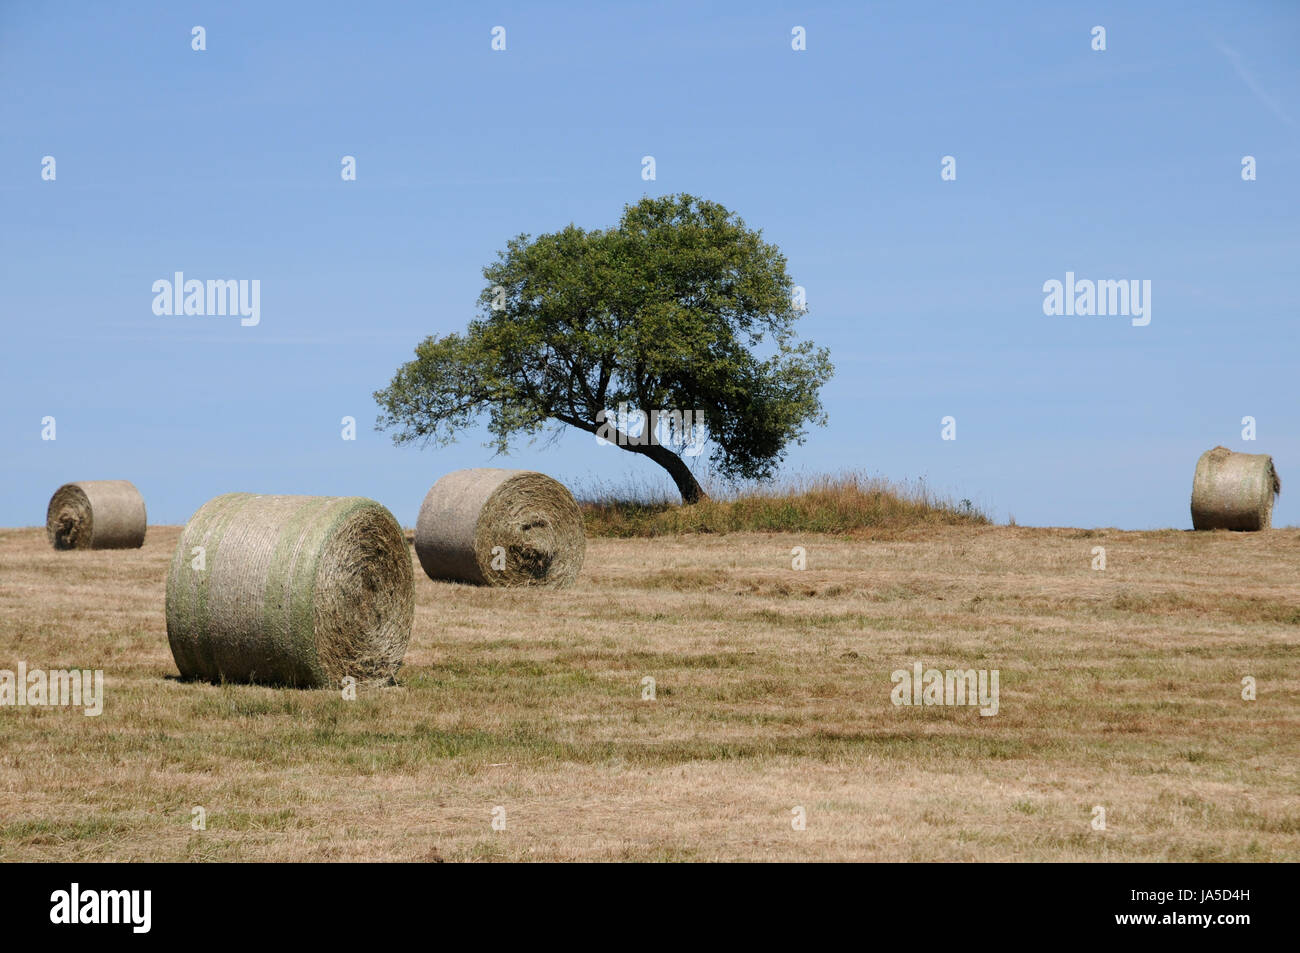 agriculture, farming, straw ball, tree, agriculture, farming, field, summer, Stock Photo